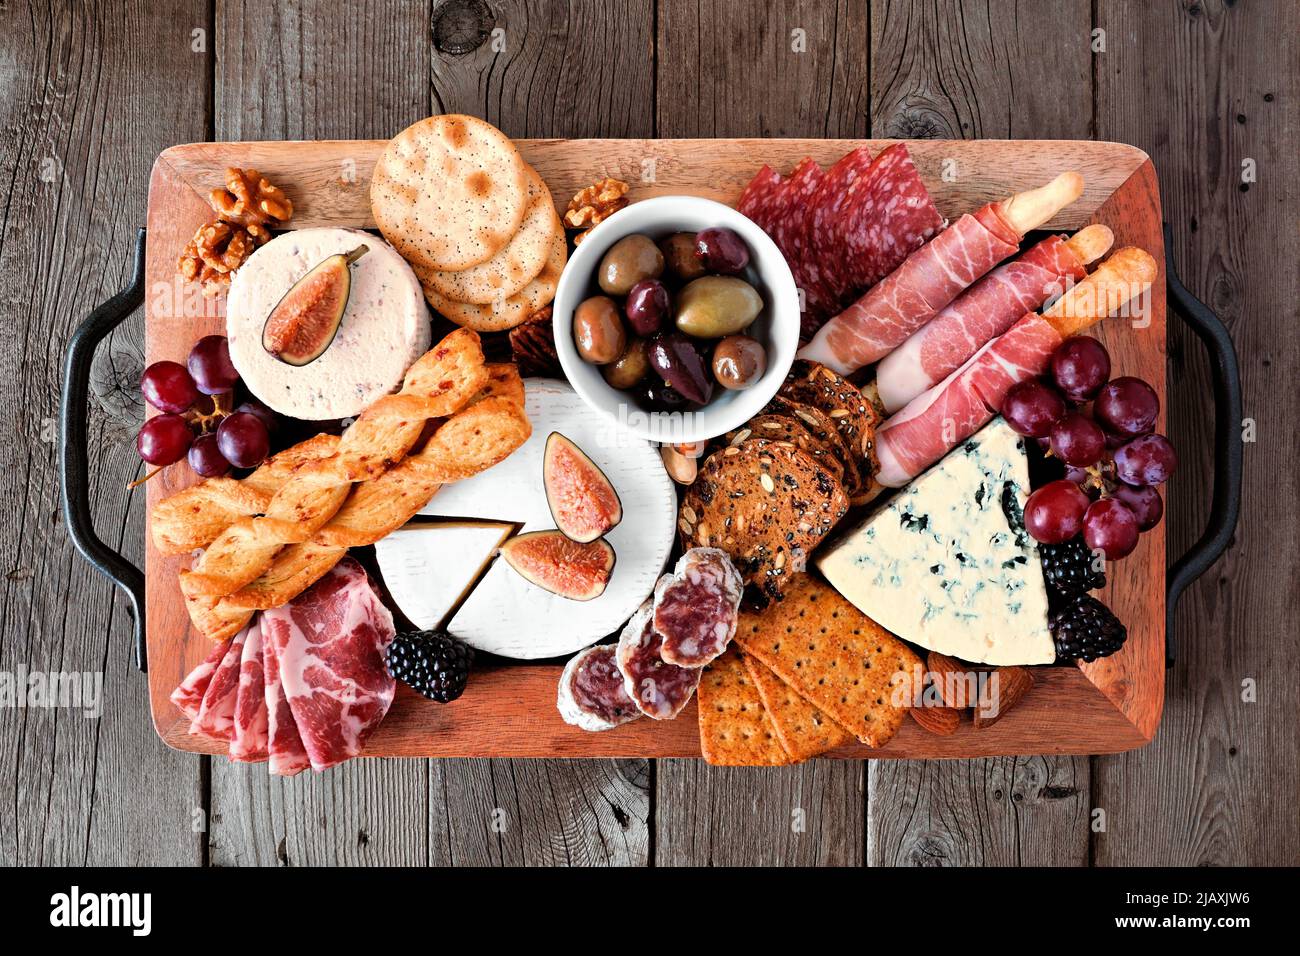 Charcuterie tray of a variety of meats, cheeses and appetizers. Top view on a dark wood background. Stock Photo